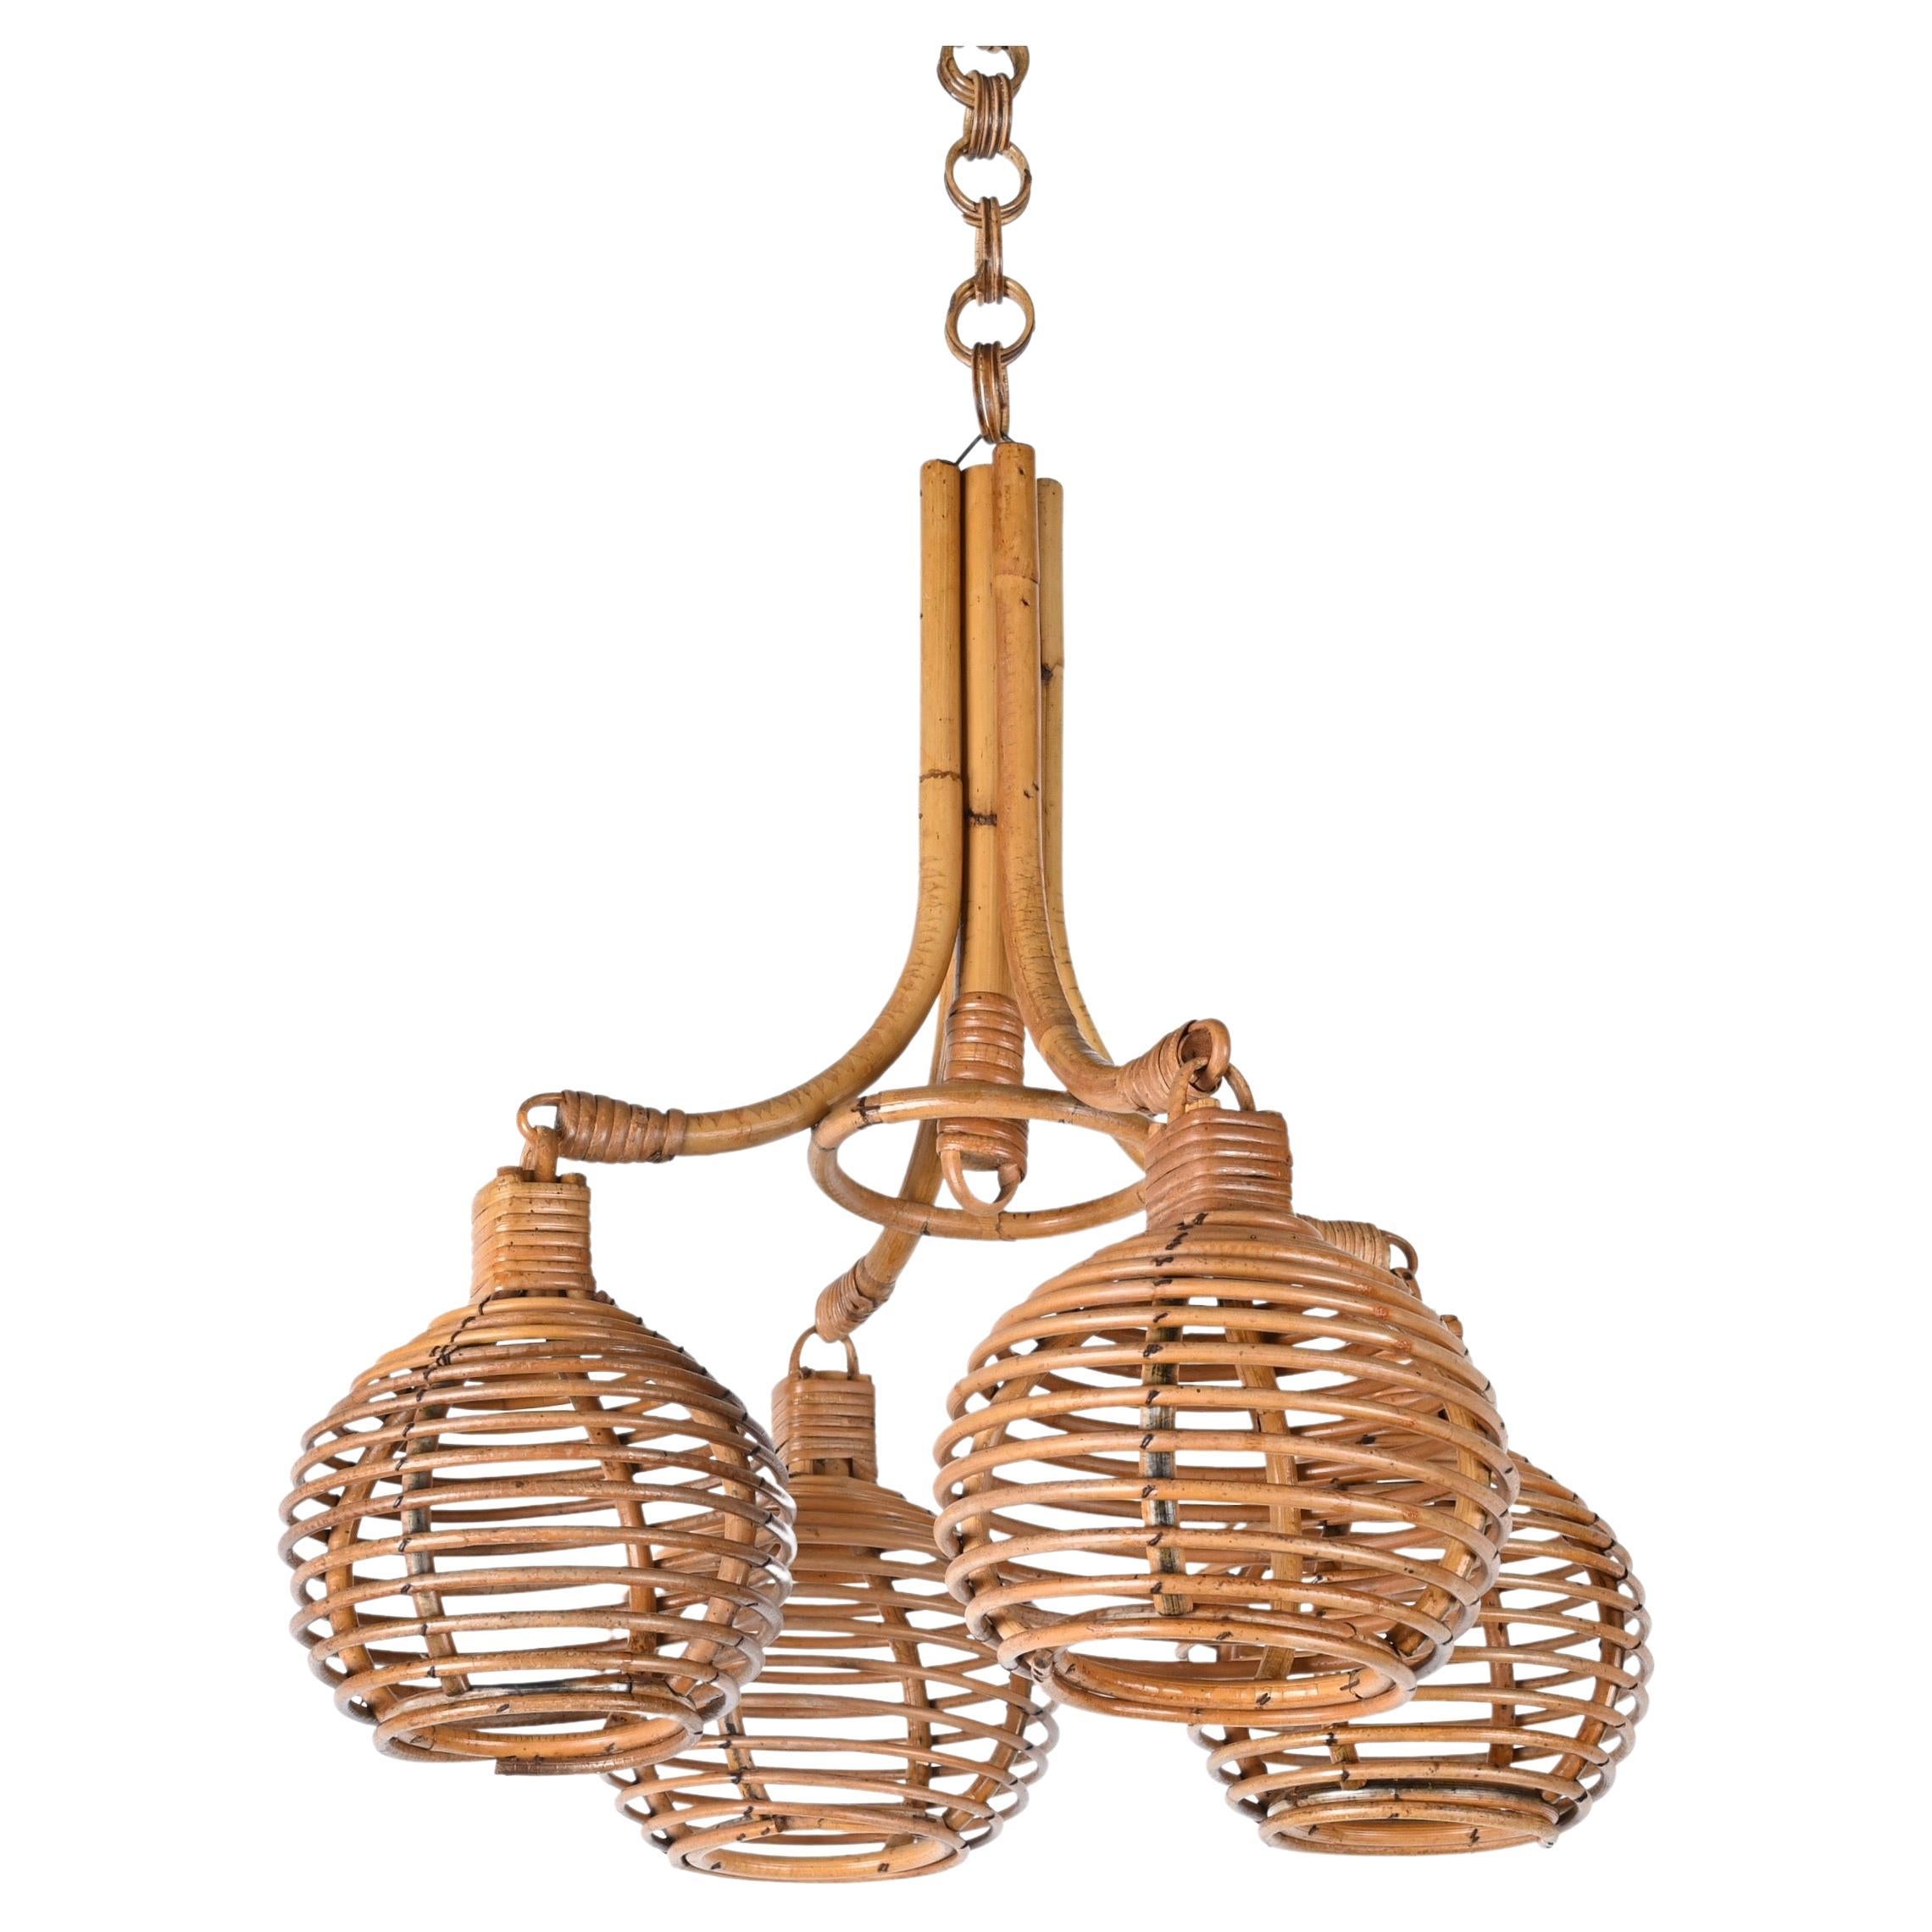 Midcentury French Riviera Bambo and Rattan 4 Sphere Italian Chandelier, 1960s